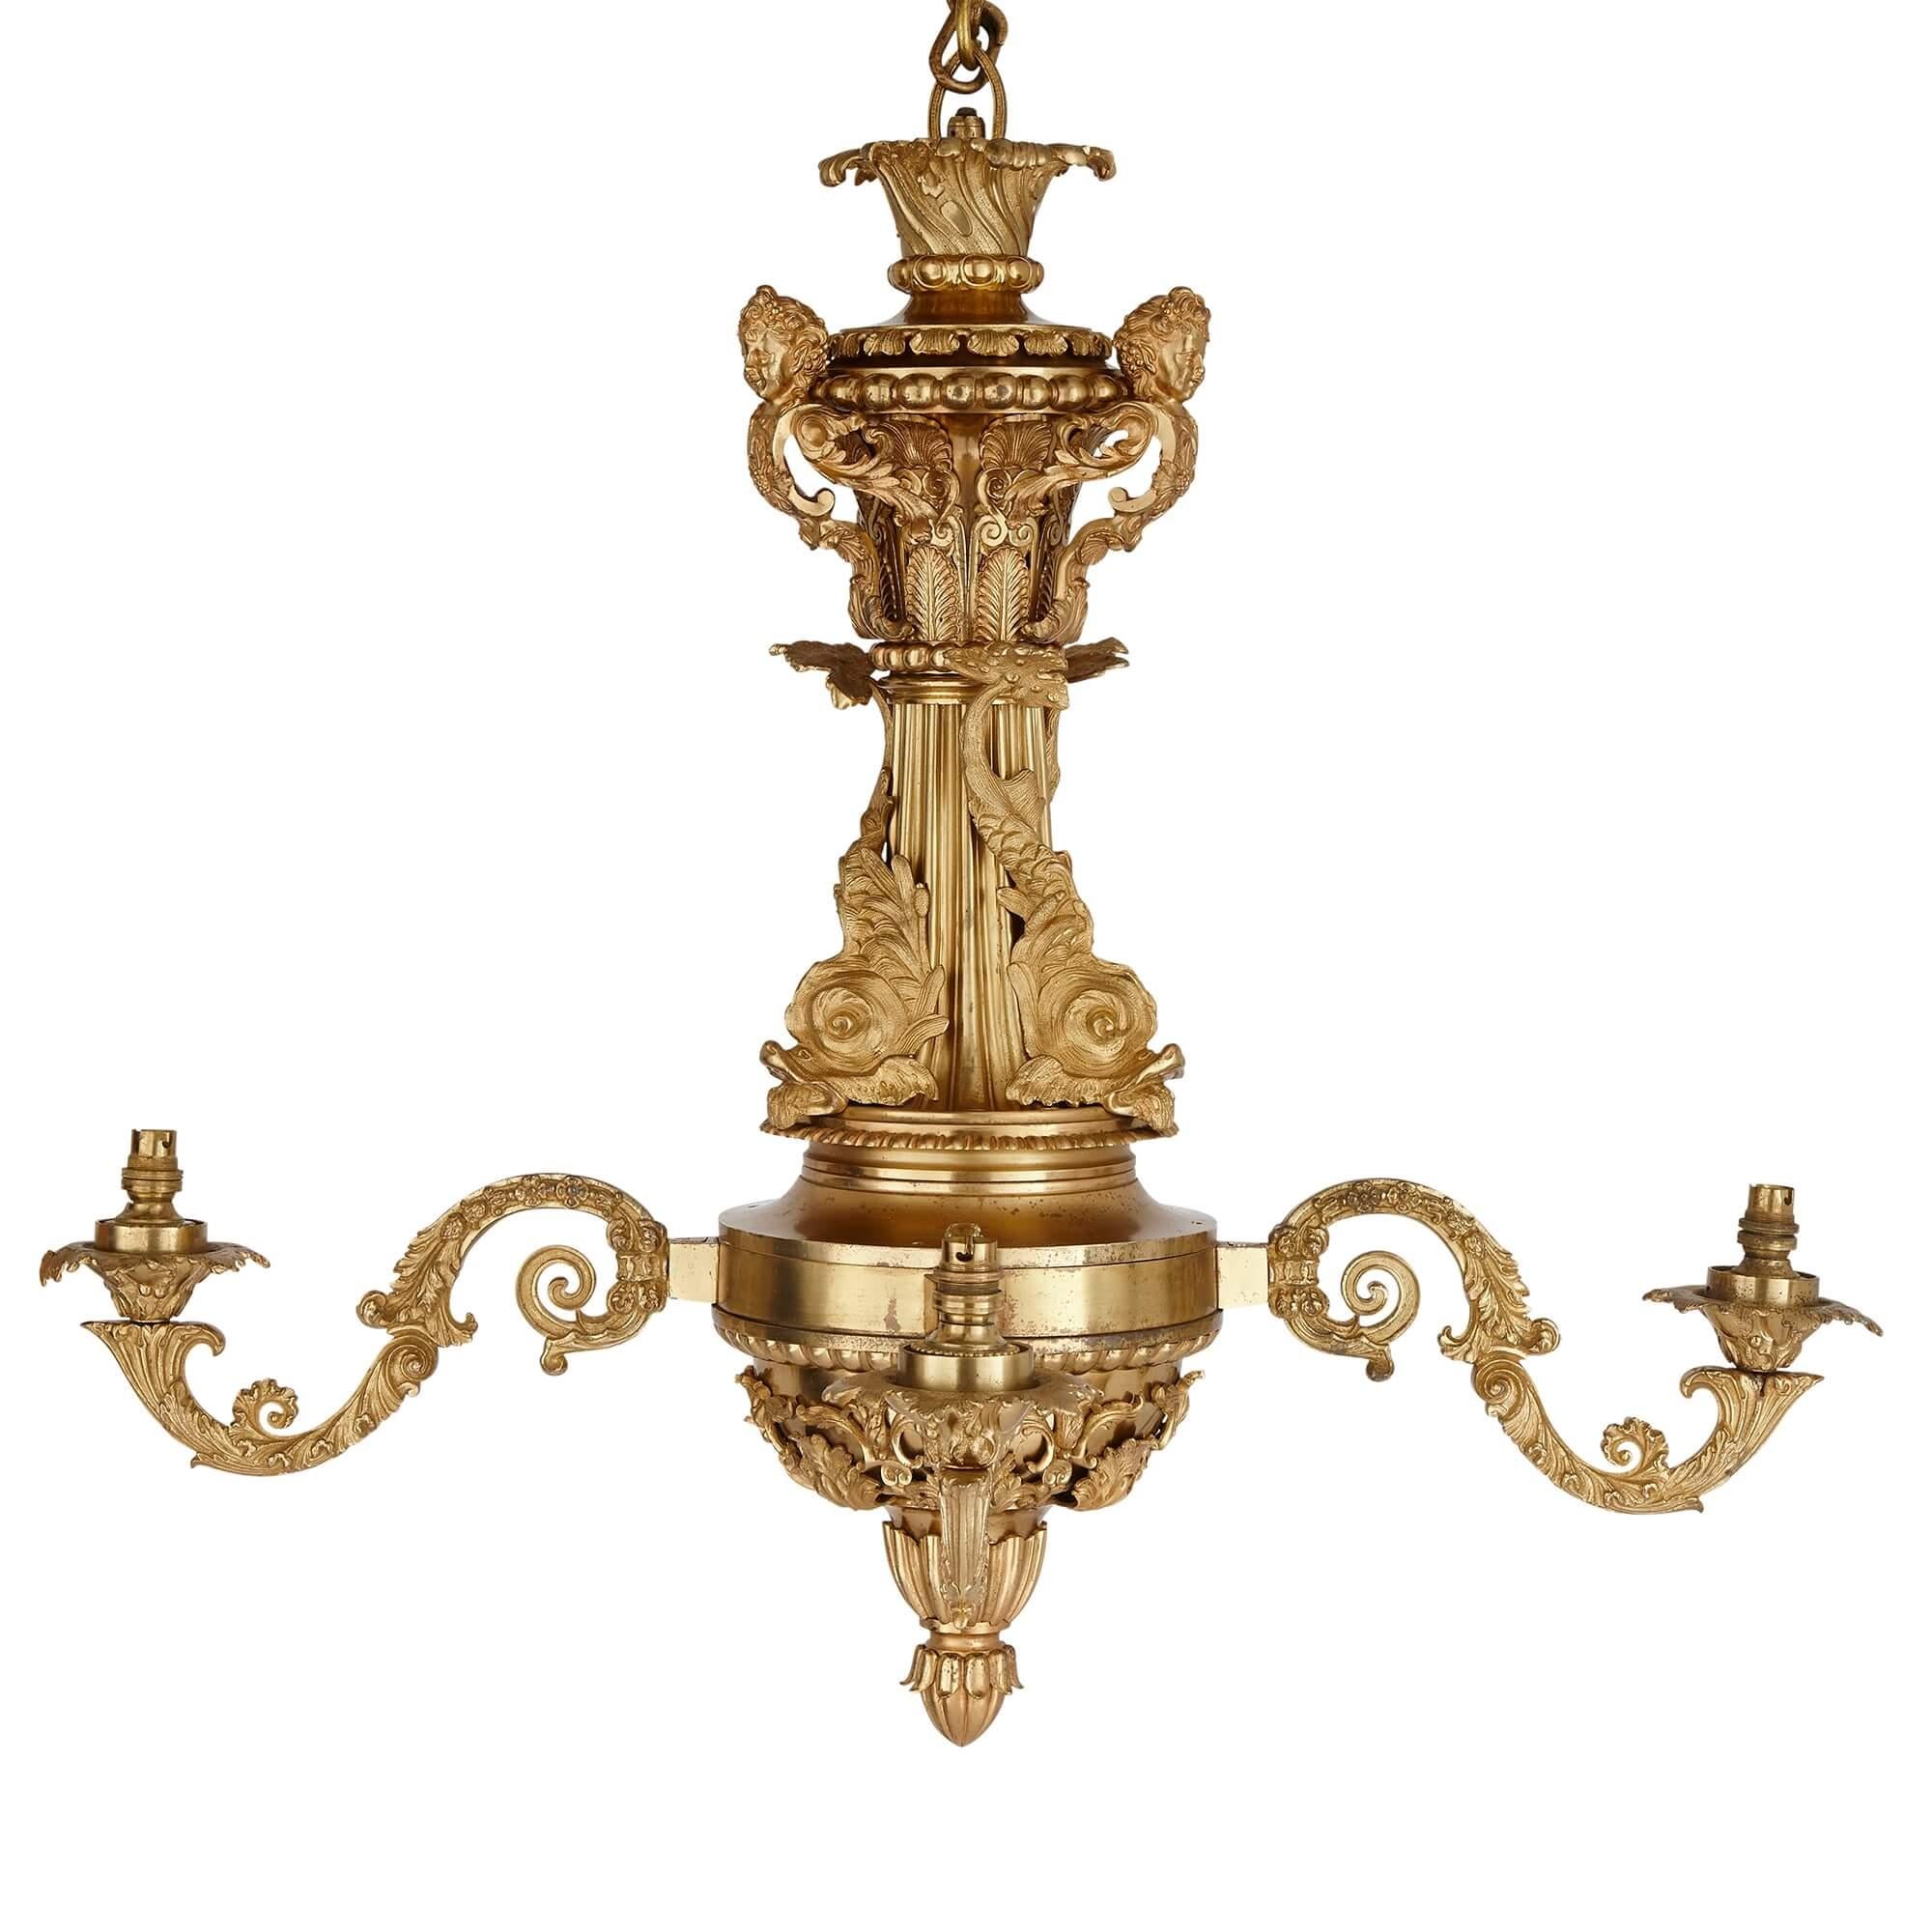 Gilt bronze Régence style antique chandelier.
French, 19th century
Measures: height 85cm, diameter 96cm

This beautiful chandelier has been cast in gilt bronze, designed to reflect the light to maximum effect. It has four lights, which have